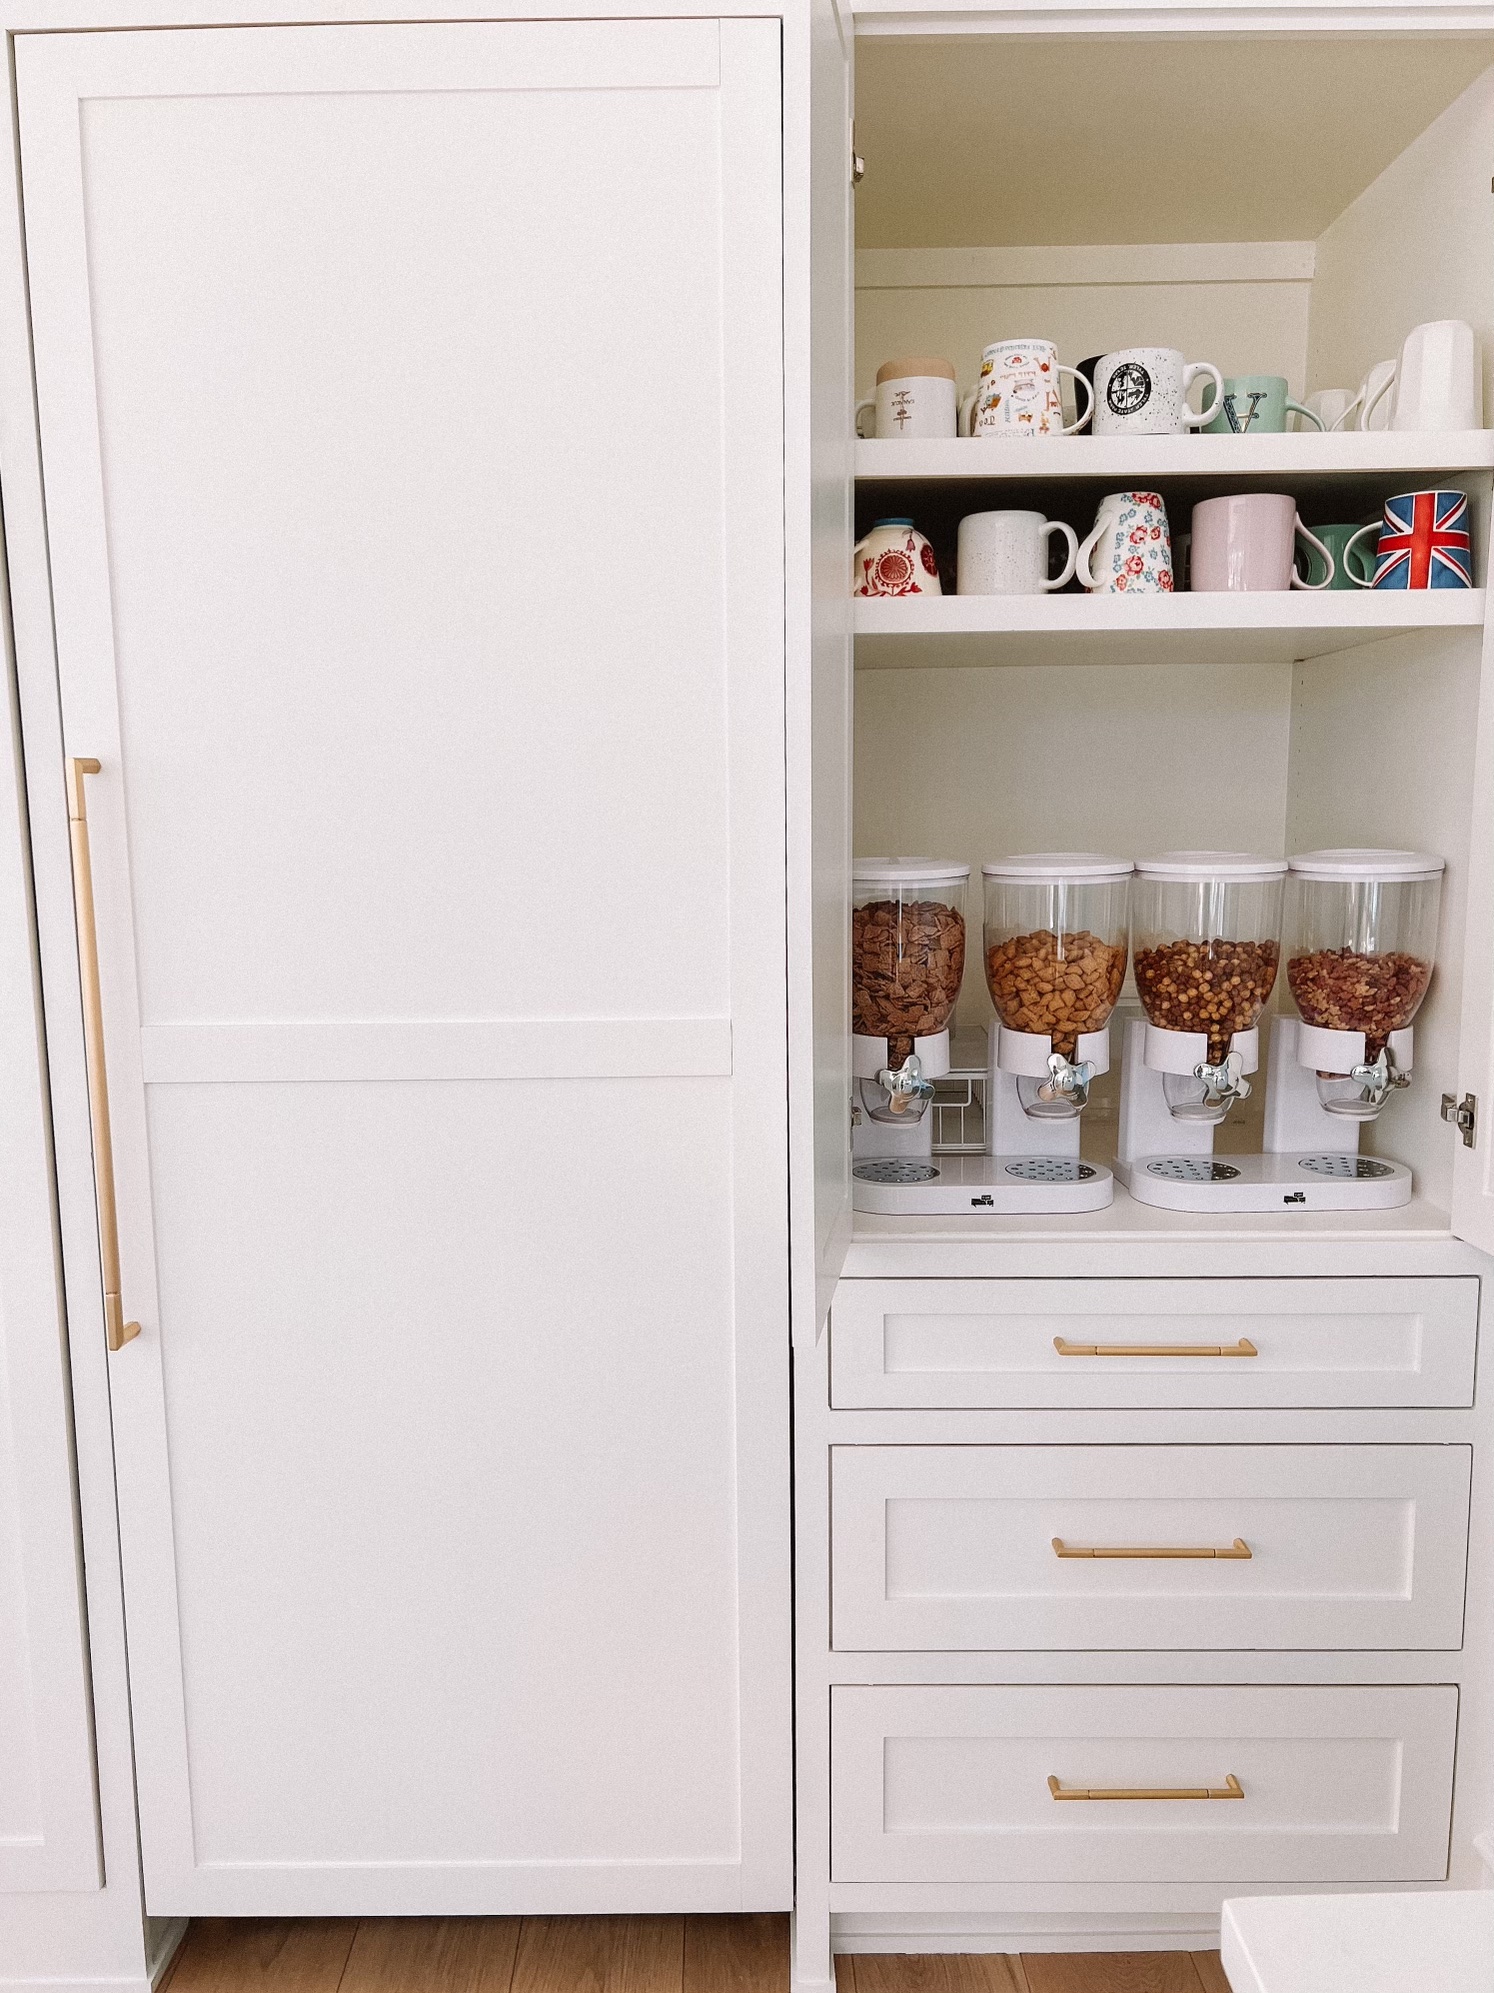 cereal bar in kitchen